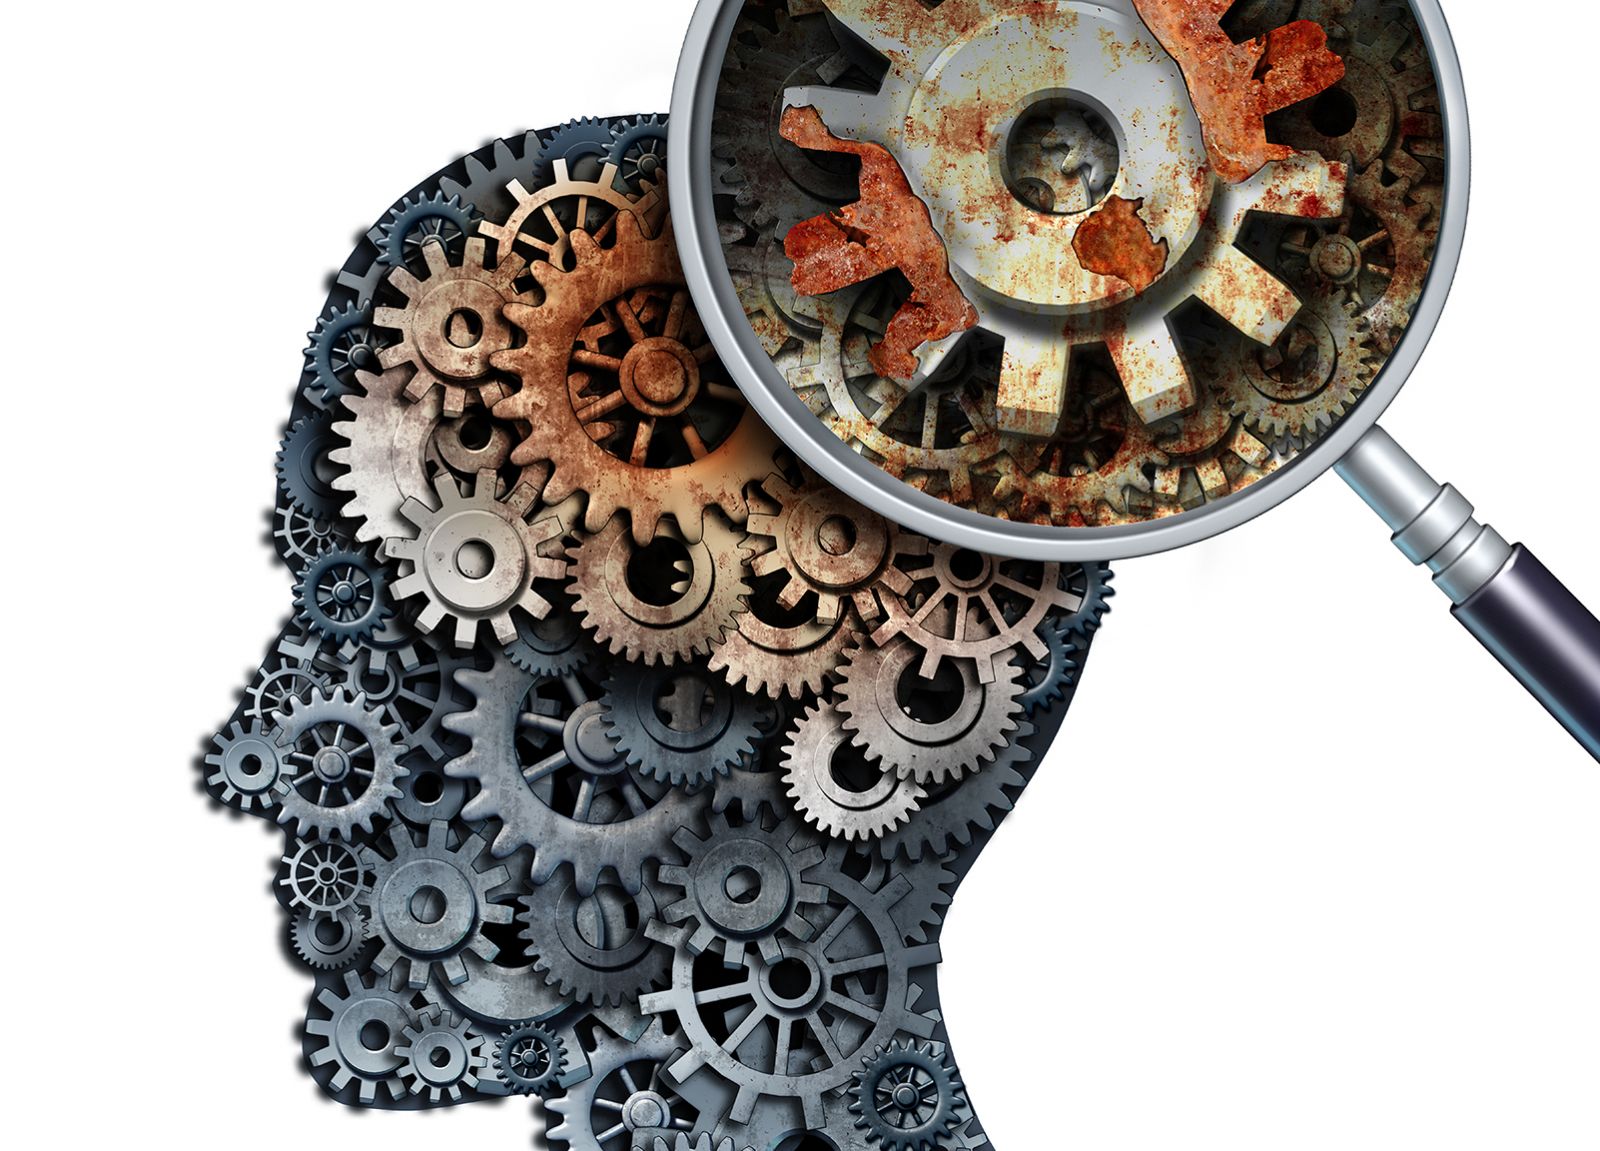 Digital picture of a metal human head with gears and innerworkings inside